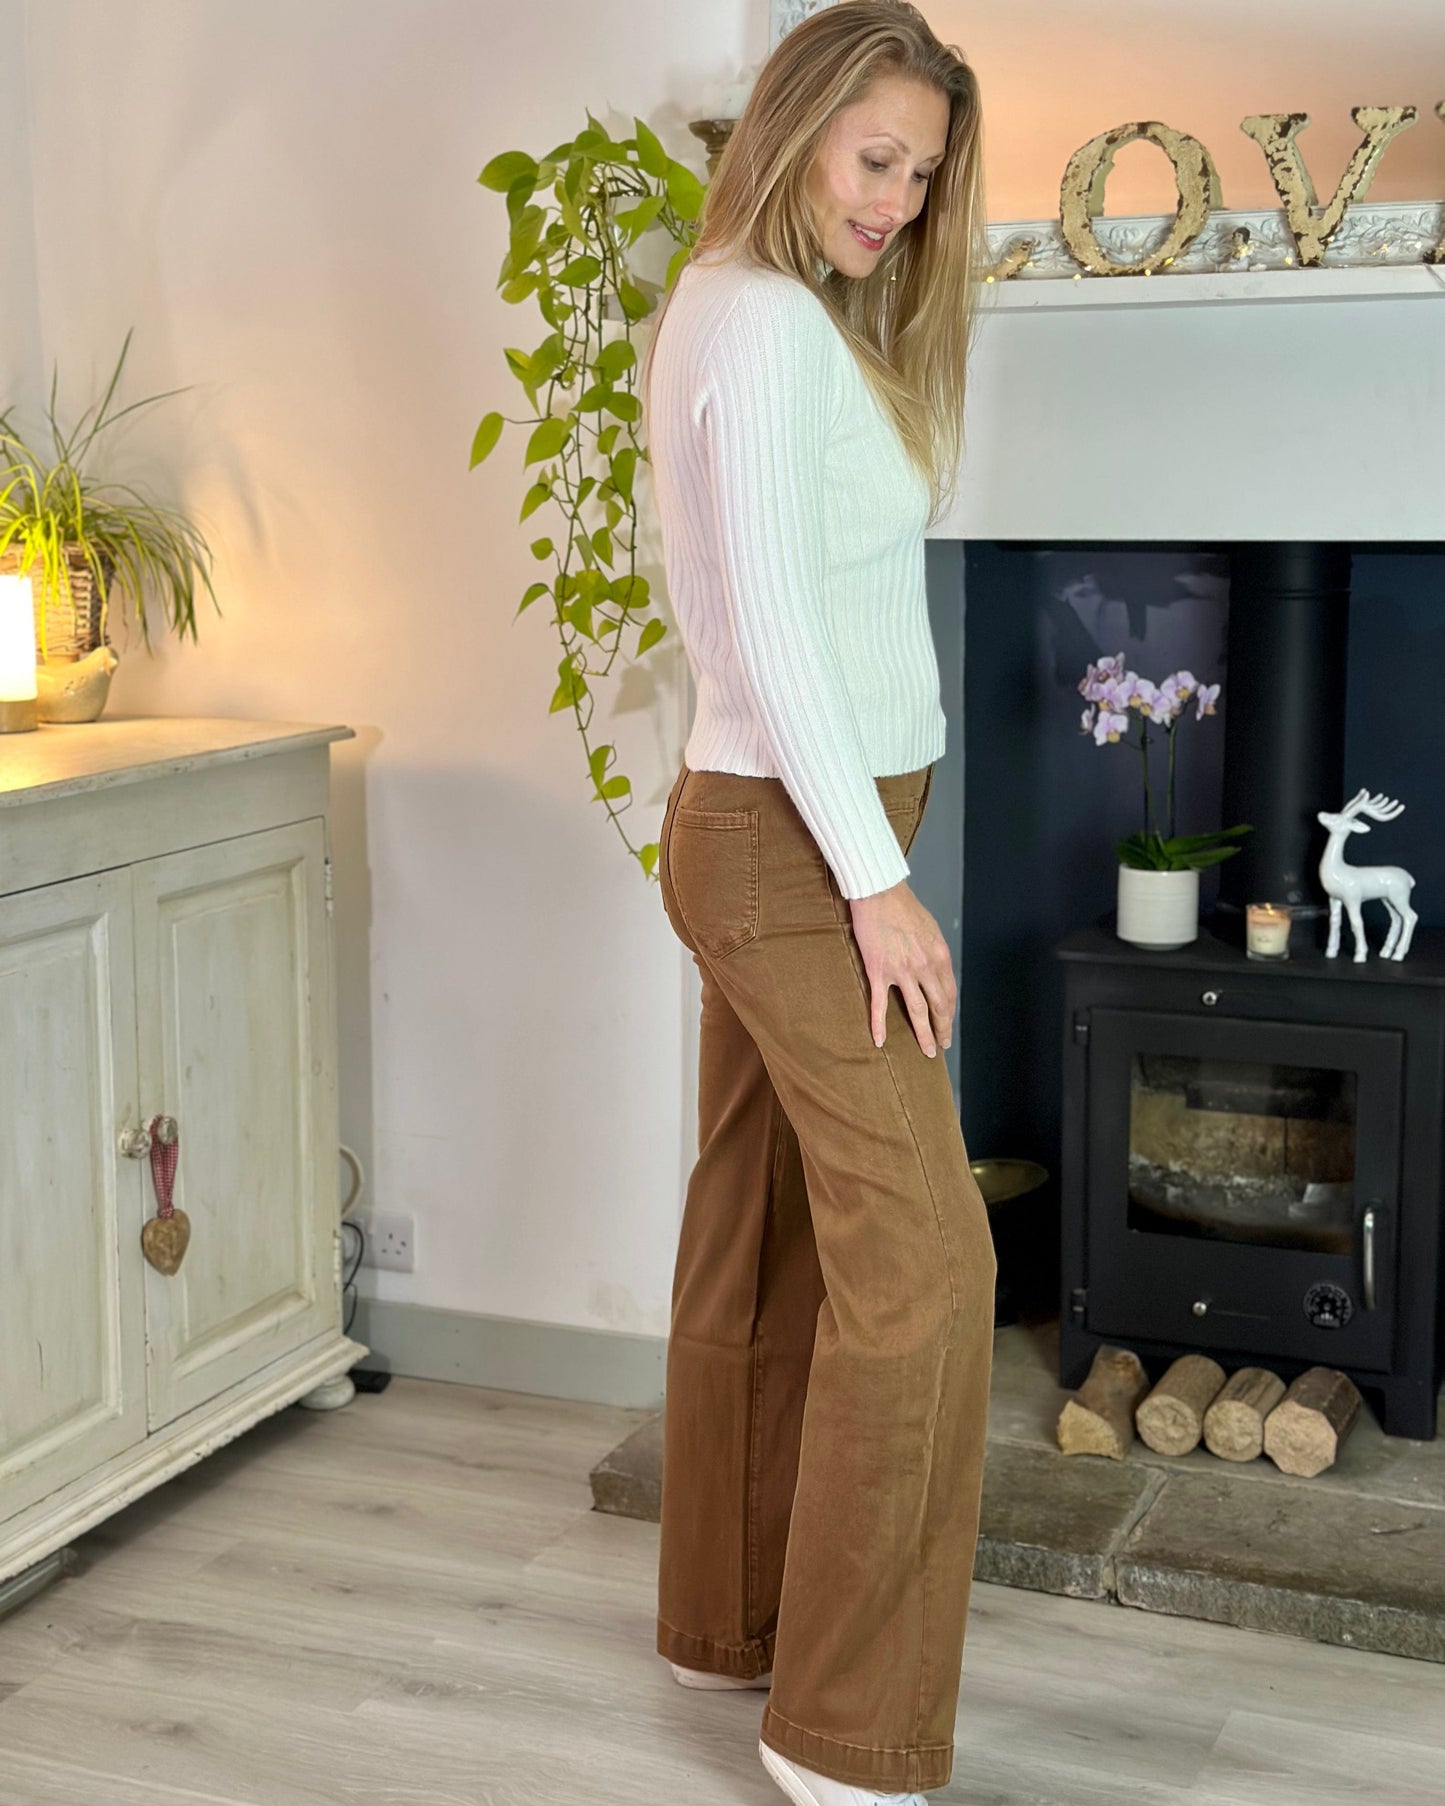 Stretchy Wide Leg Jeans - Tobacco